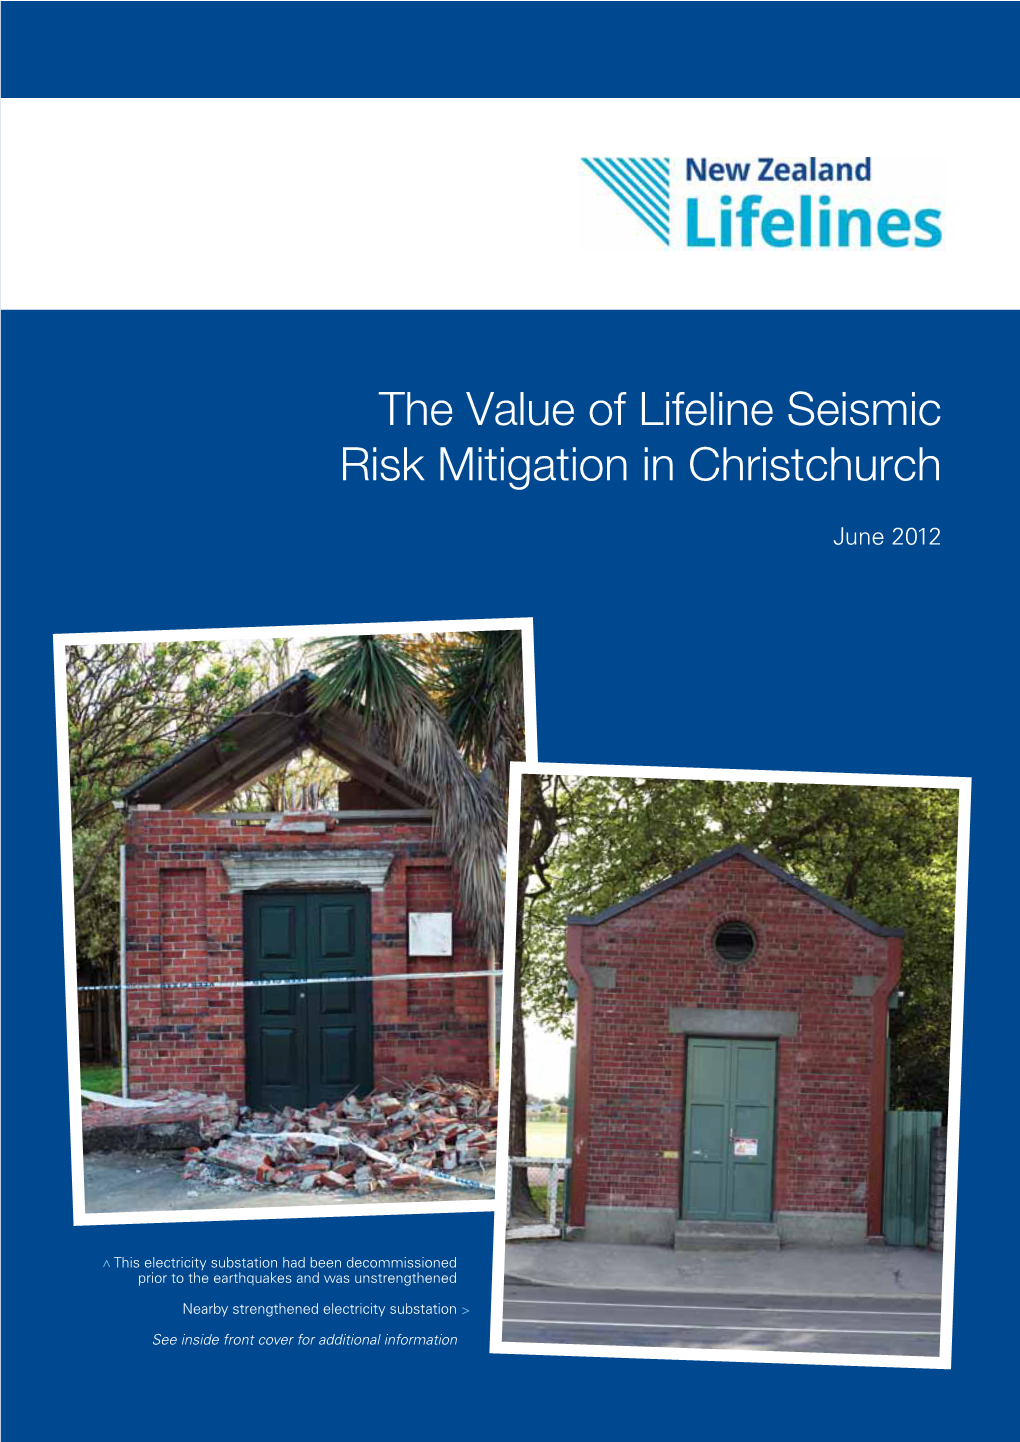 The Value of Lifeline Seismic Risk Mitigation in Christchurch – June 2012 Executive Summary